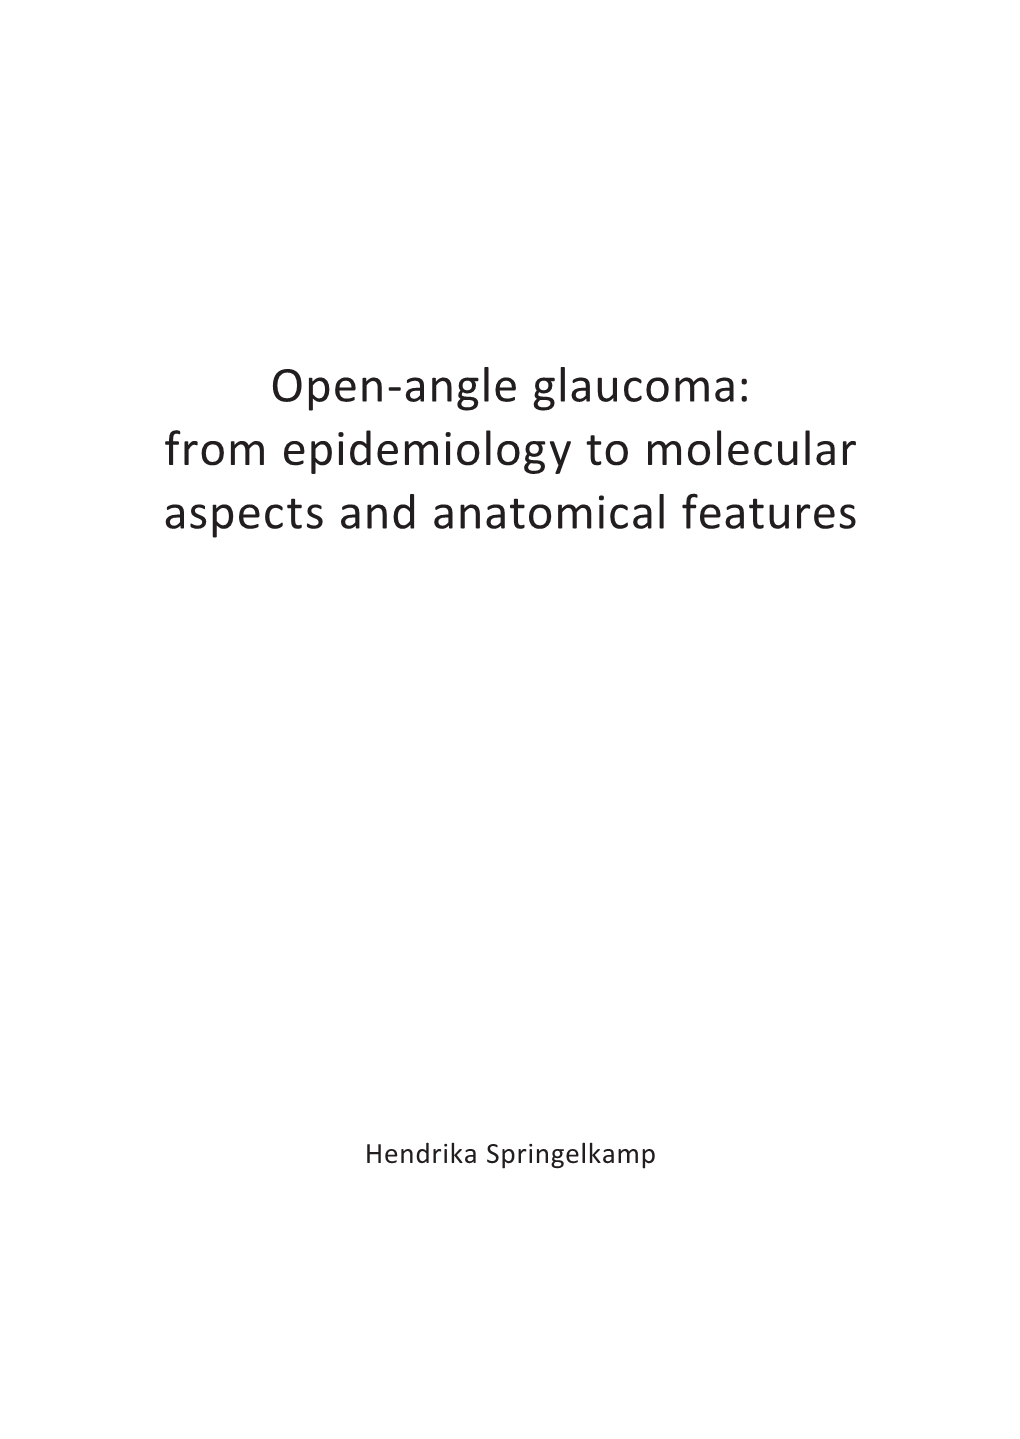 Open-Angle Glaucoma: from Epidemiology to Molecular Aspects and Anatomical Features